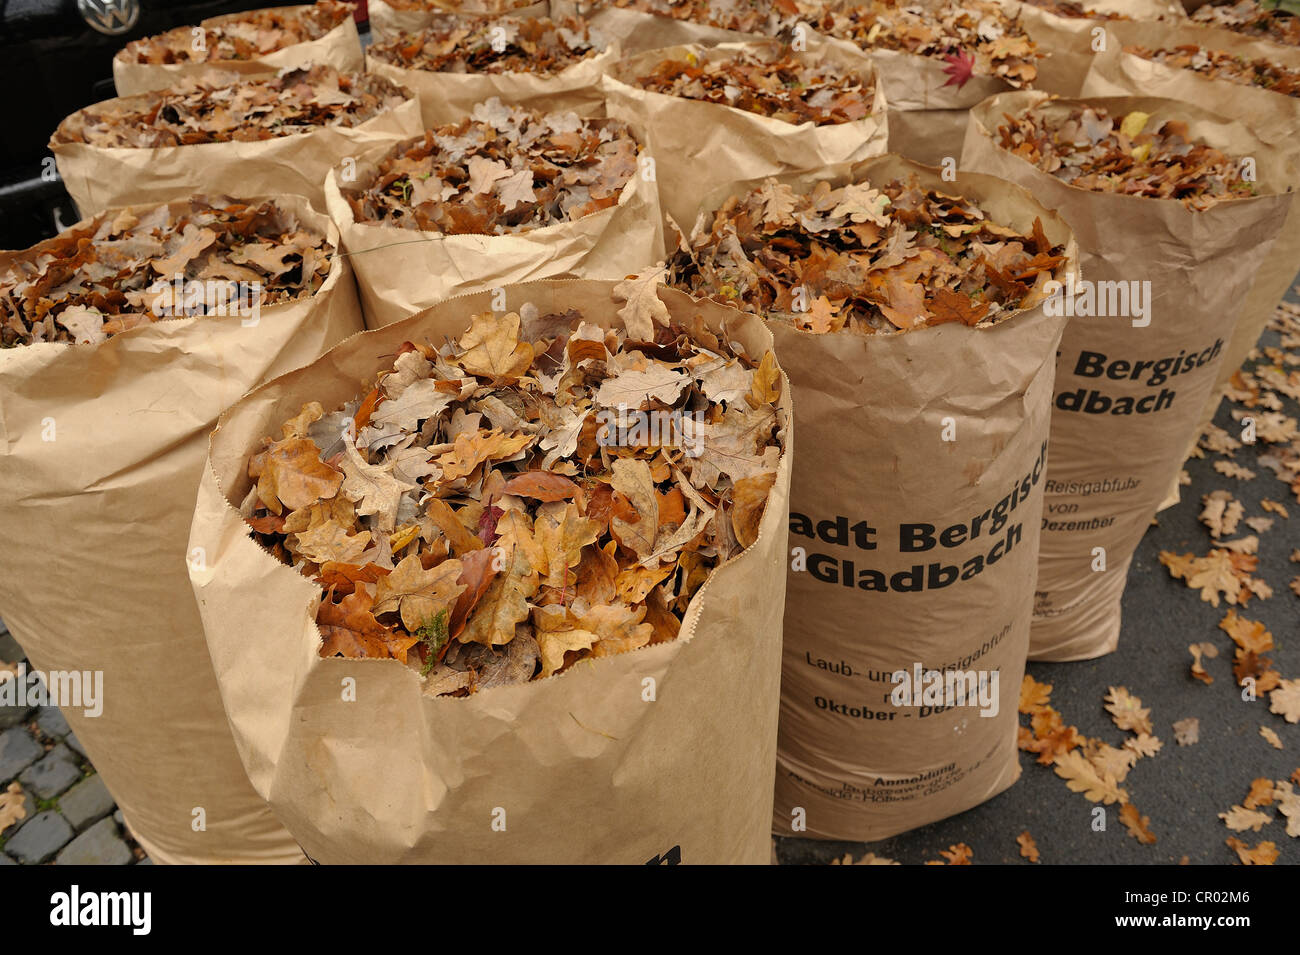 Foliage removal in sacks for households in a city, Germany, Europe Stock Photo